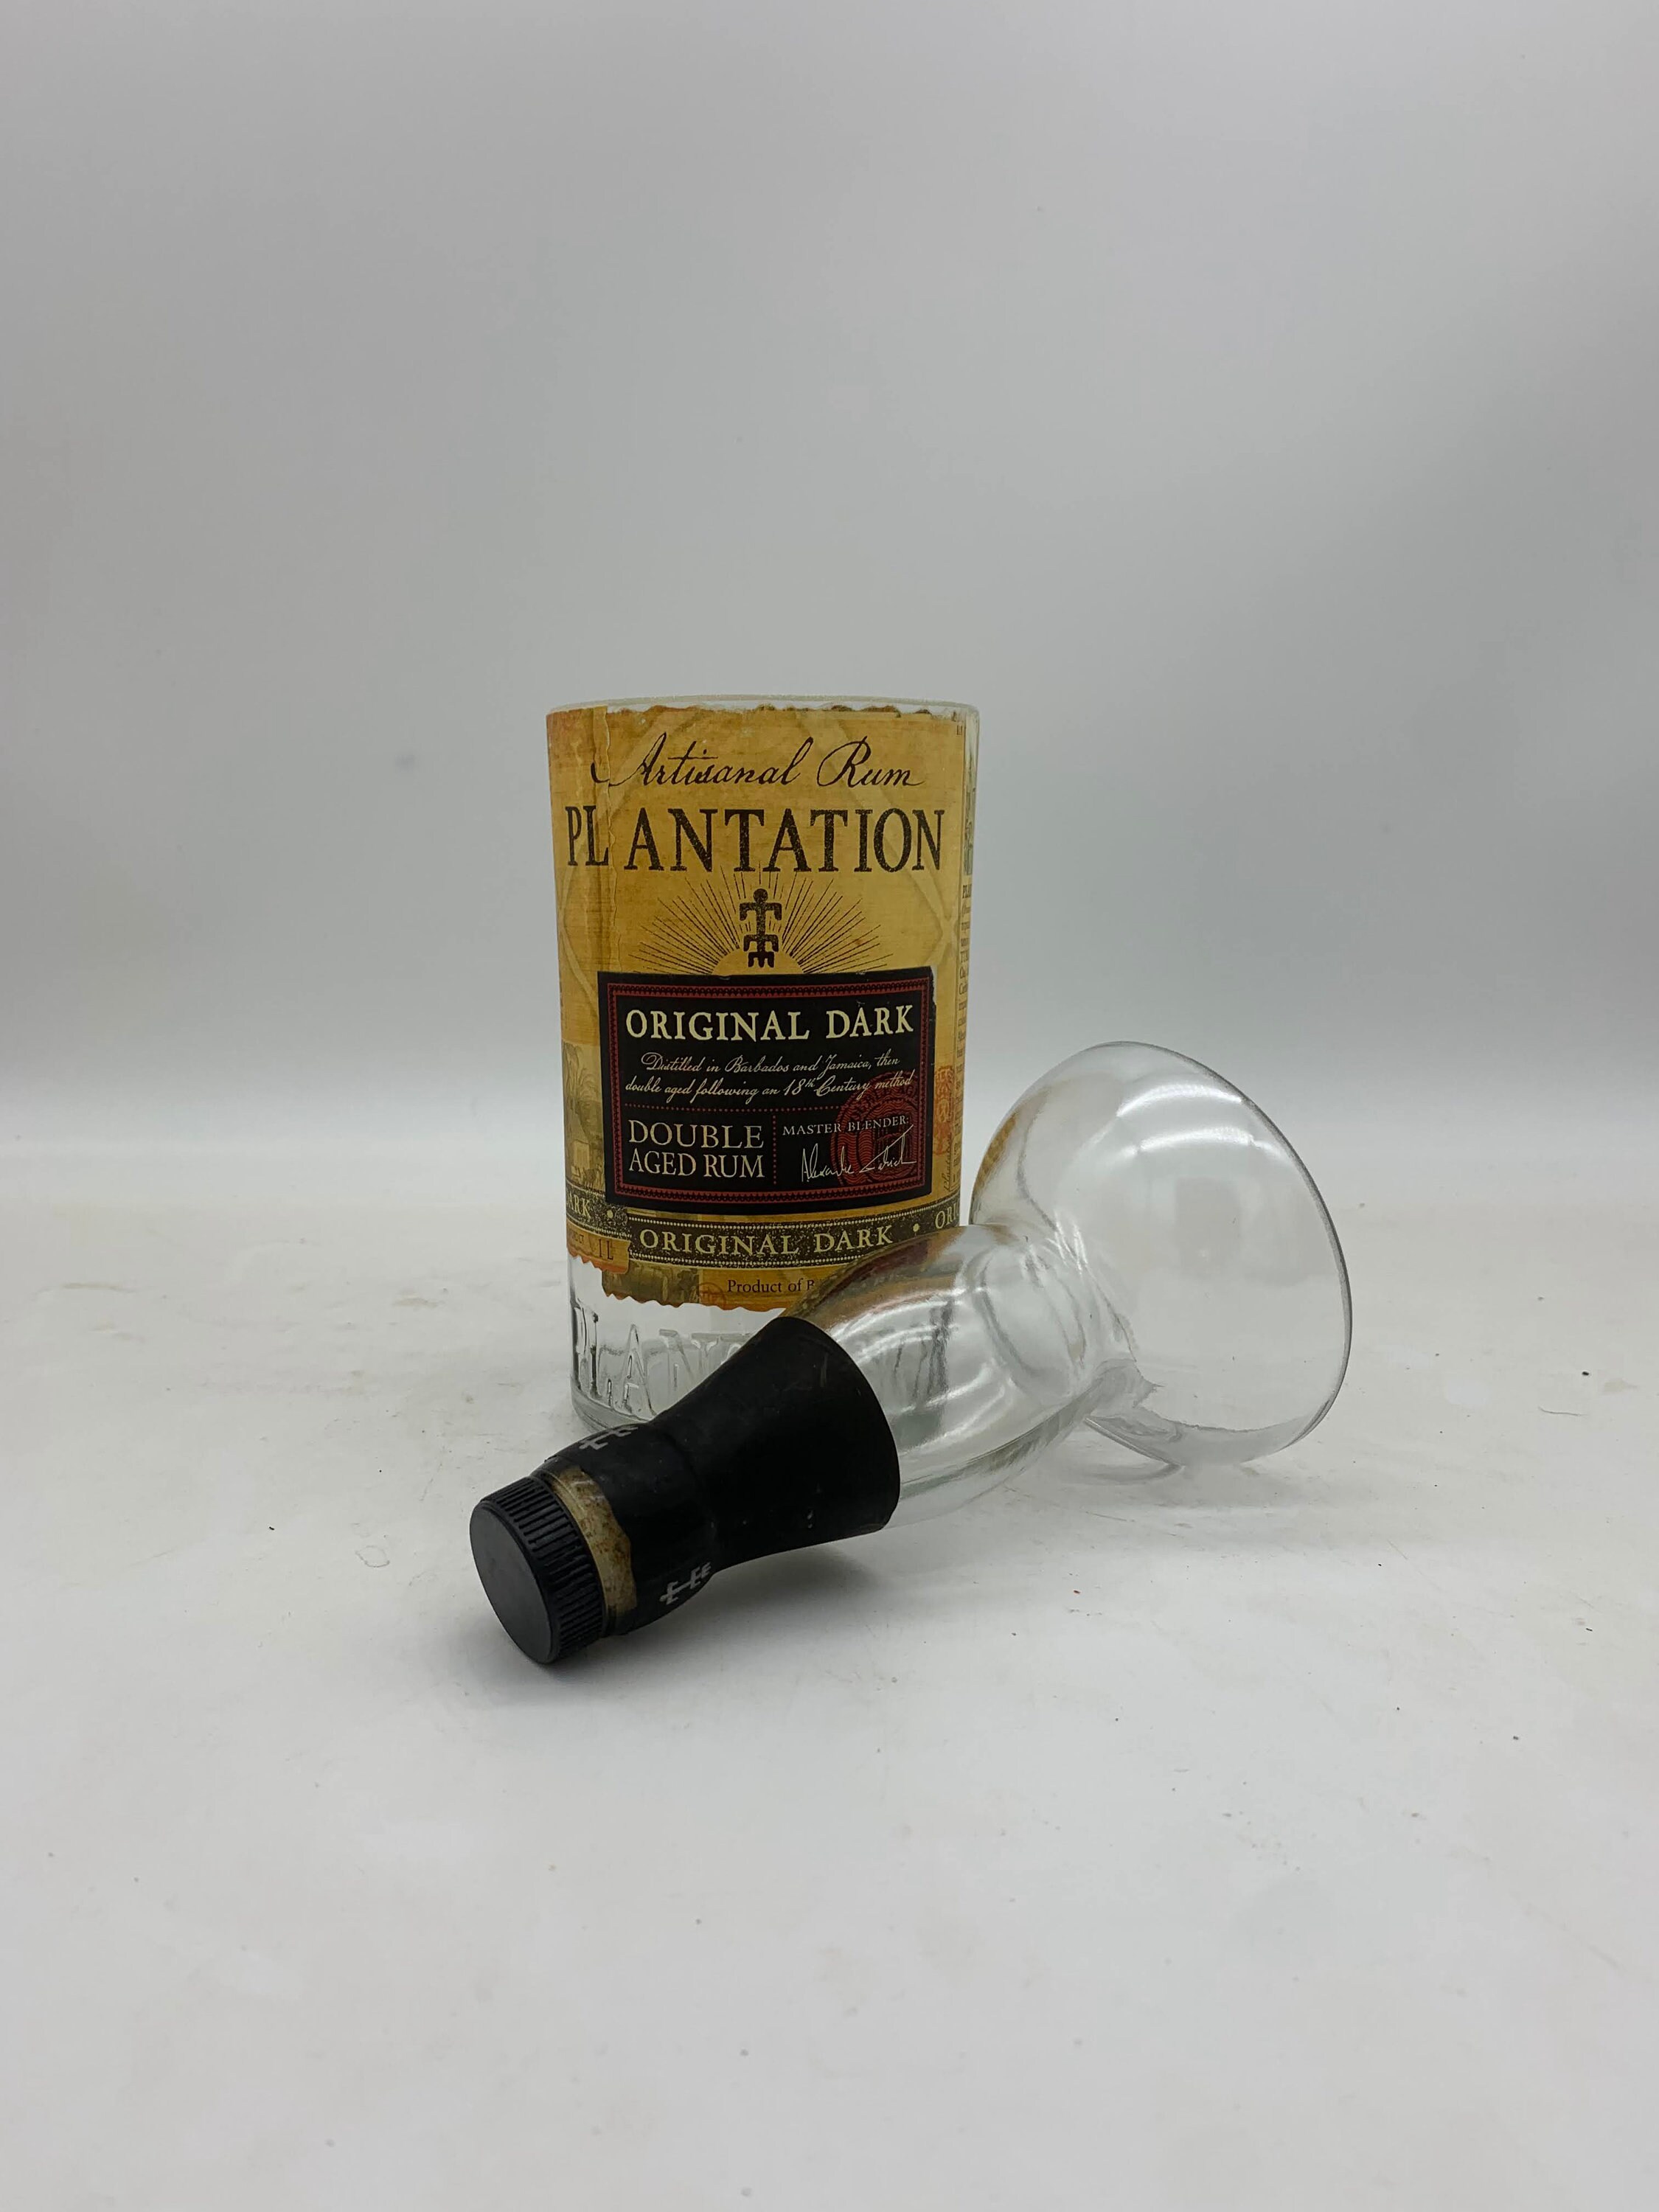 Plantation Original Dark Rum Candle, Scented Soy Wax, Choose the Fragrance,  Cut Liquor Bottle, Many Scents, Gift, Vase, Upcycled, Recycled - Etsy